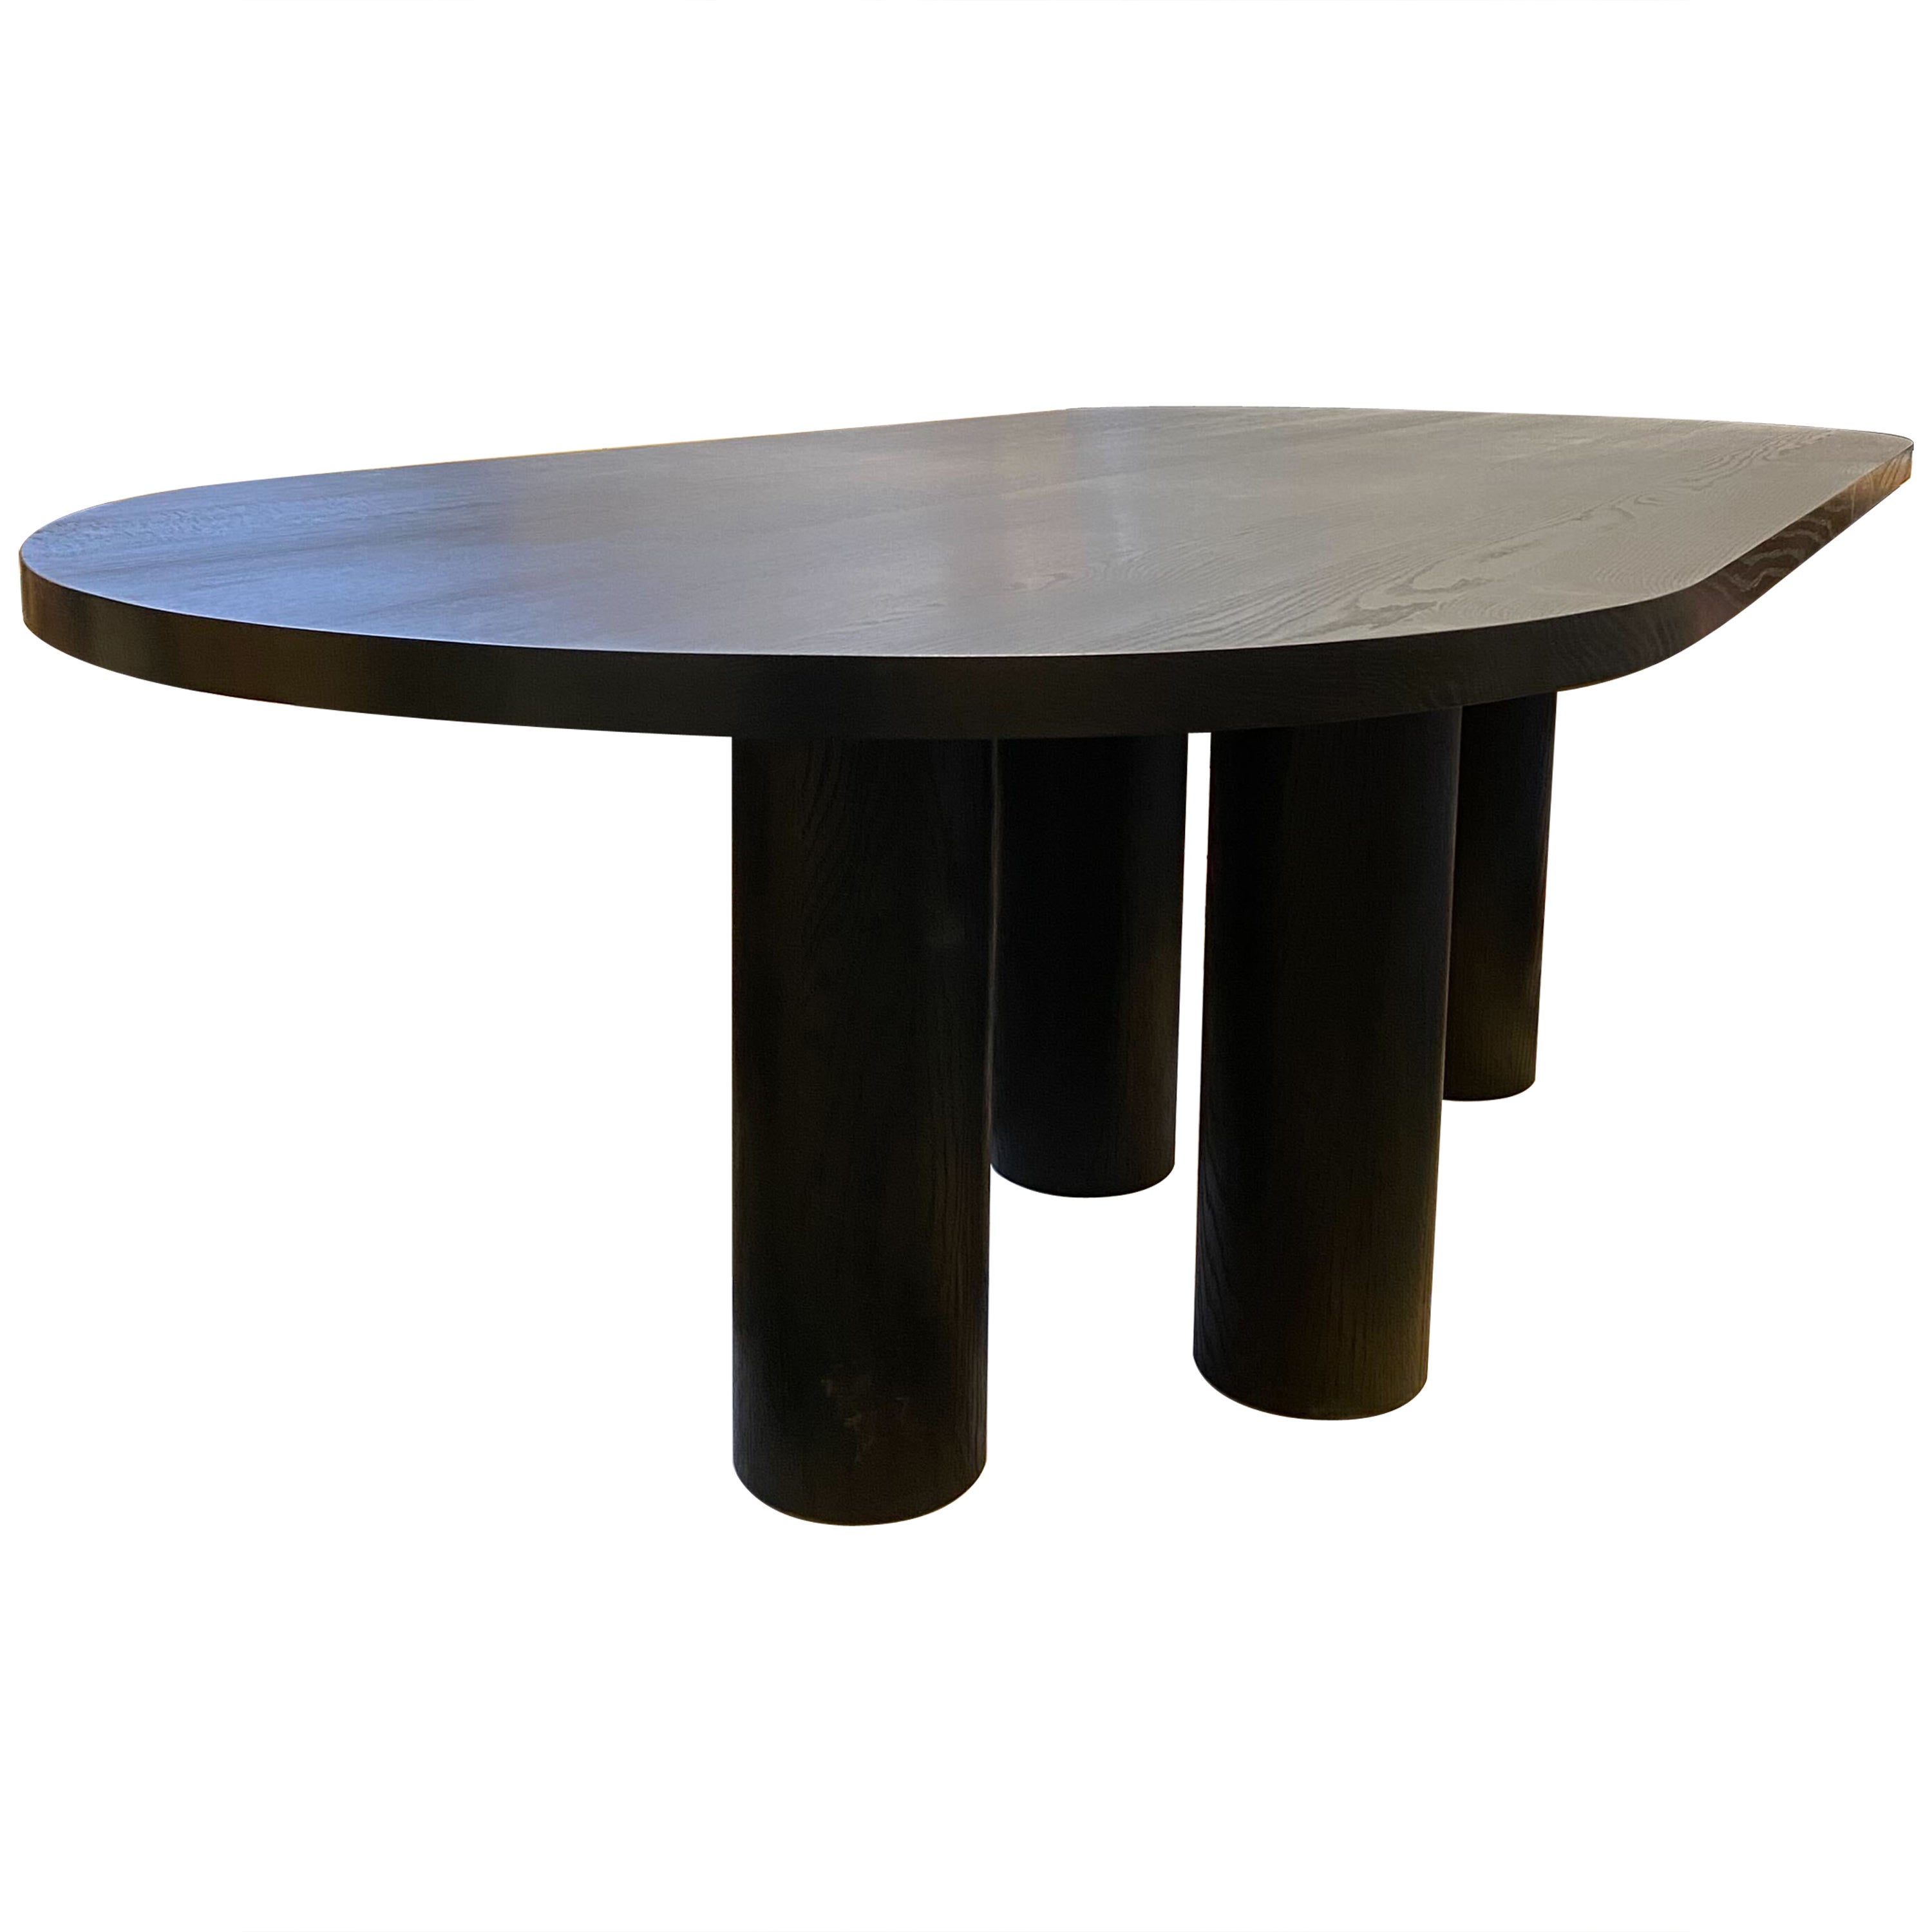 Eden Solid Black Oak Dining Table with Turned Legs 84"L by Mary Ratcliffe Studio